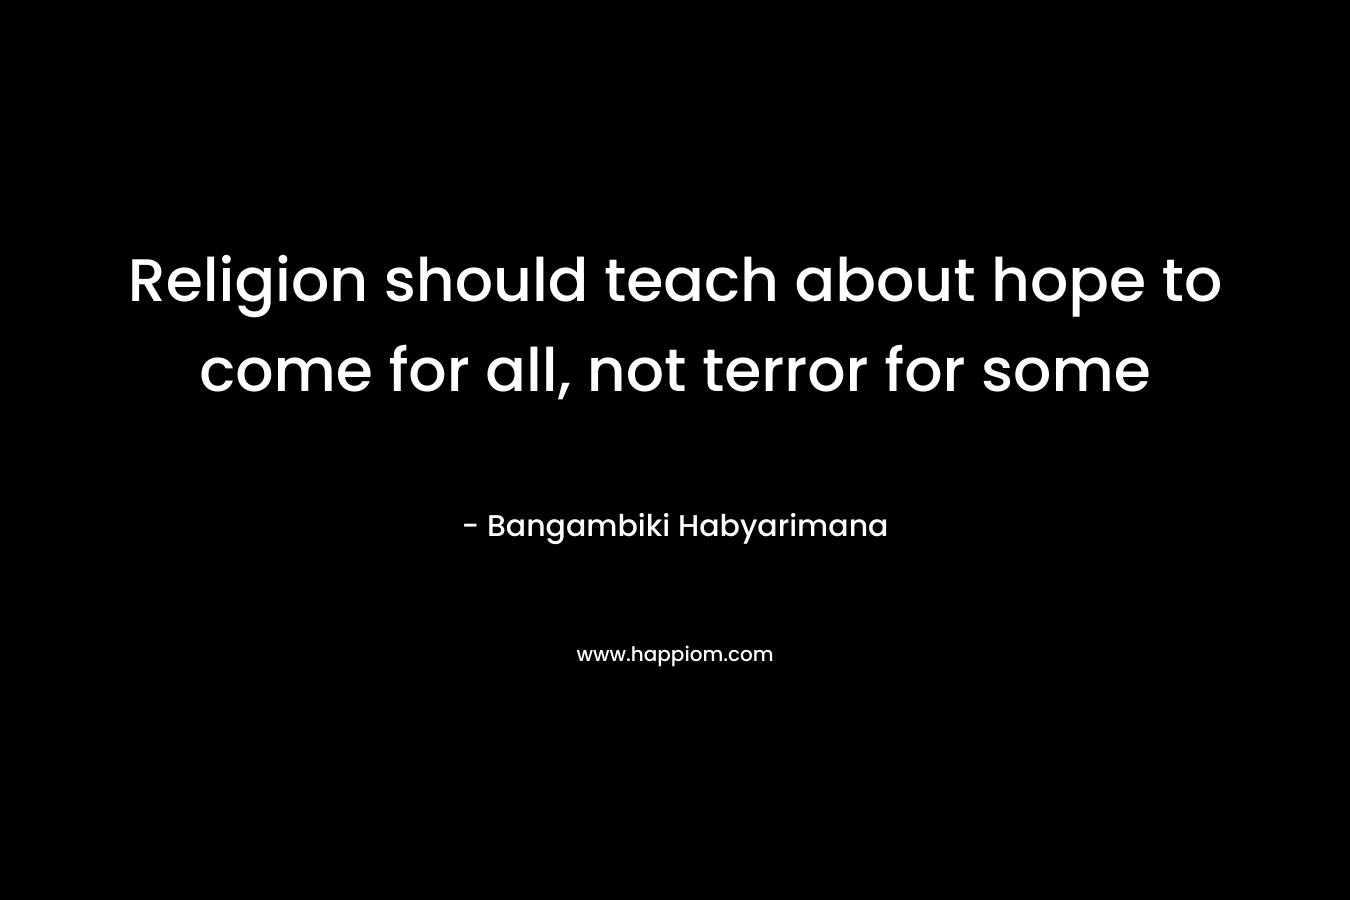 Religion should teach about hope to come for all, not terror for some